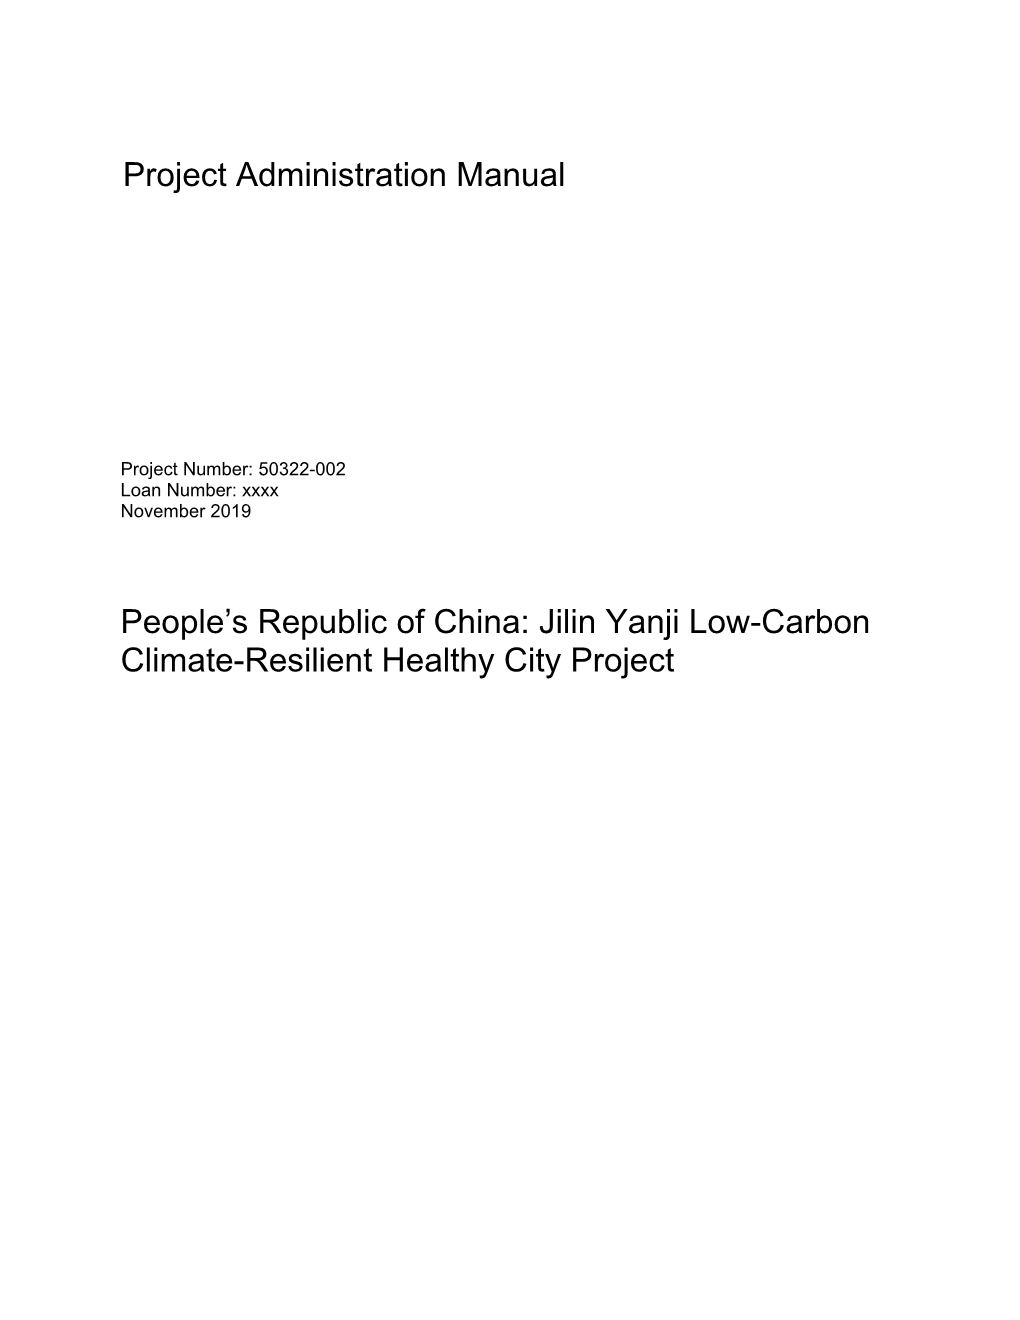 Jilin Yanji Low-Carbon Climate-Resilient Healthy City Project ABBREVIATIONS